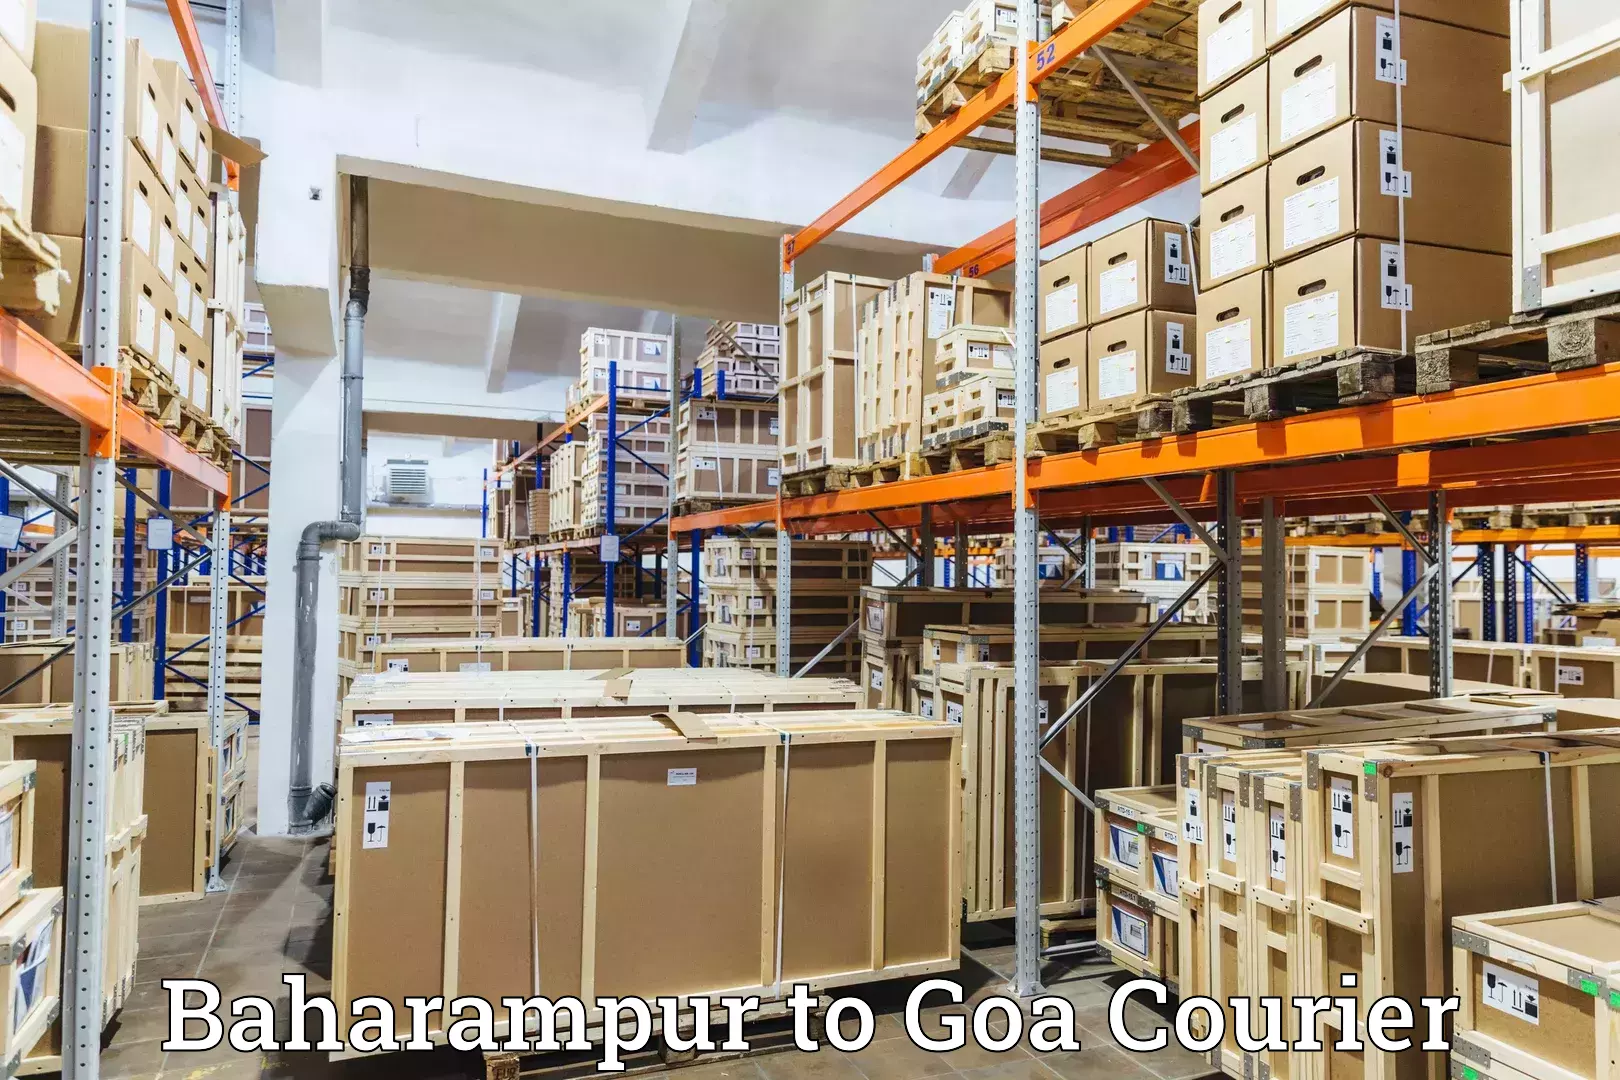 User-friendly delivery service Baharampur to Goa University